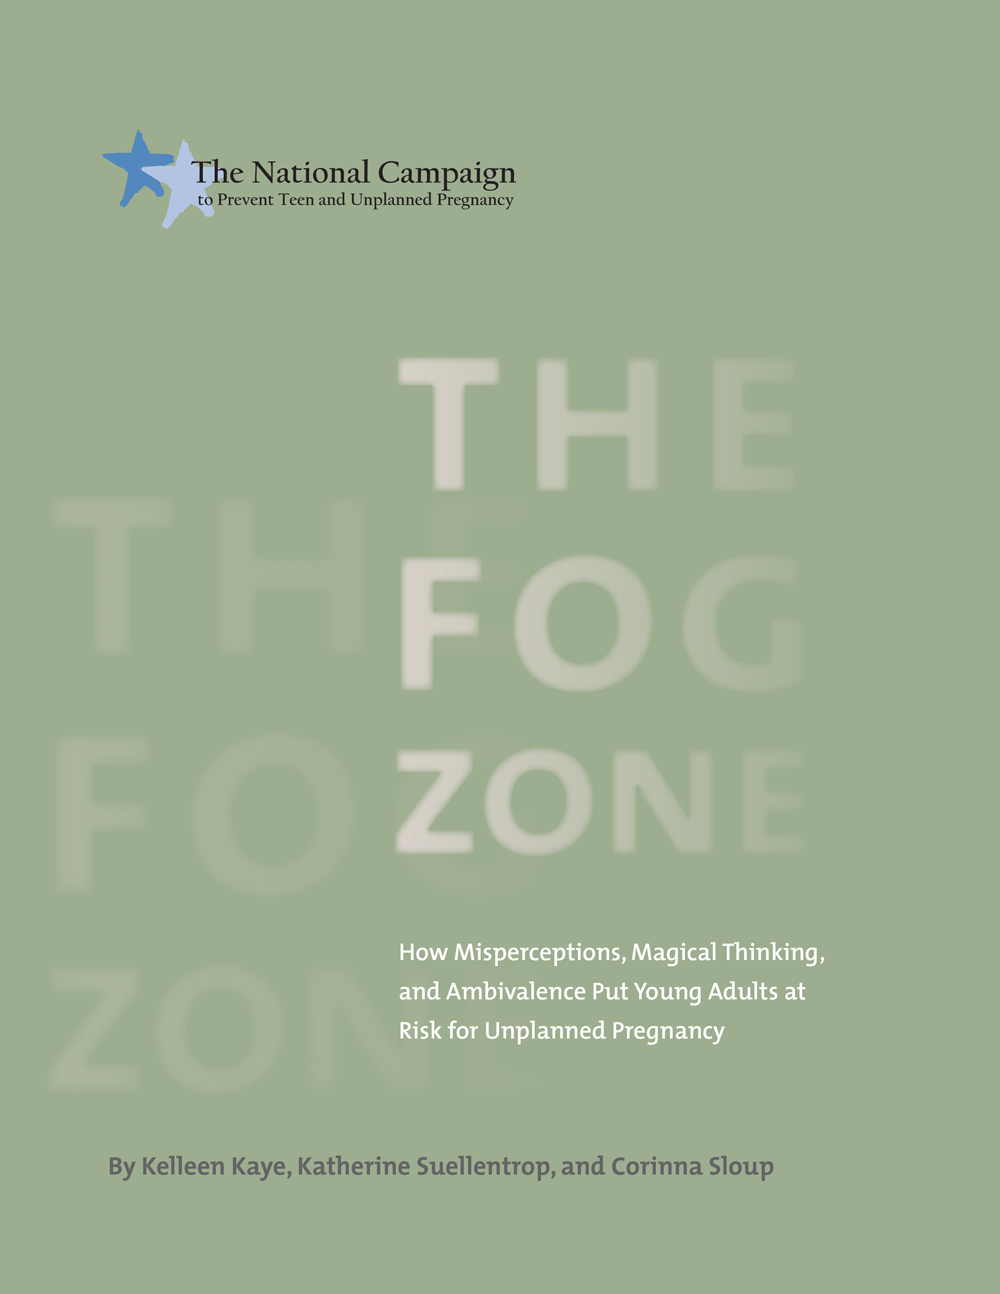 The Fog Zone: How Misperceptions, Magical Thinking, and Ambivalence Put Young Adults at Risk for Unplanned Pregnancy—Full Report